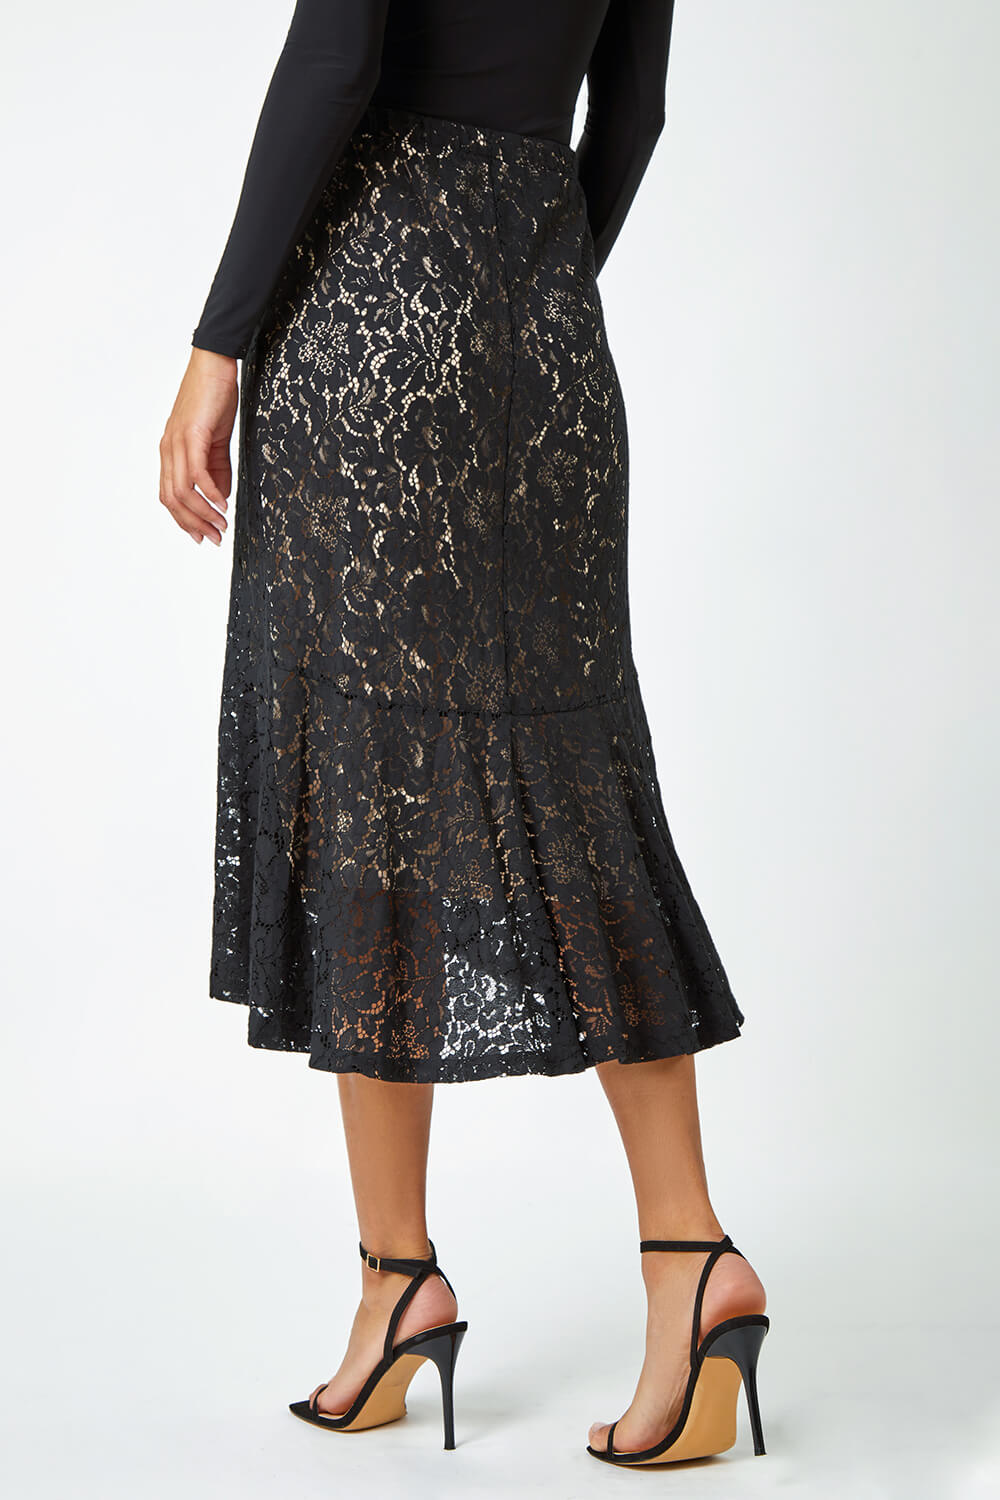 Black Cotton Blend Lace Stretch Skirt , Image 3 of 5